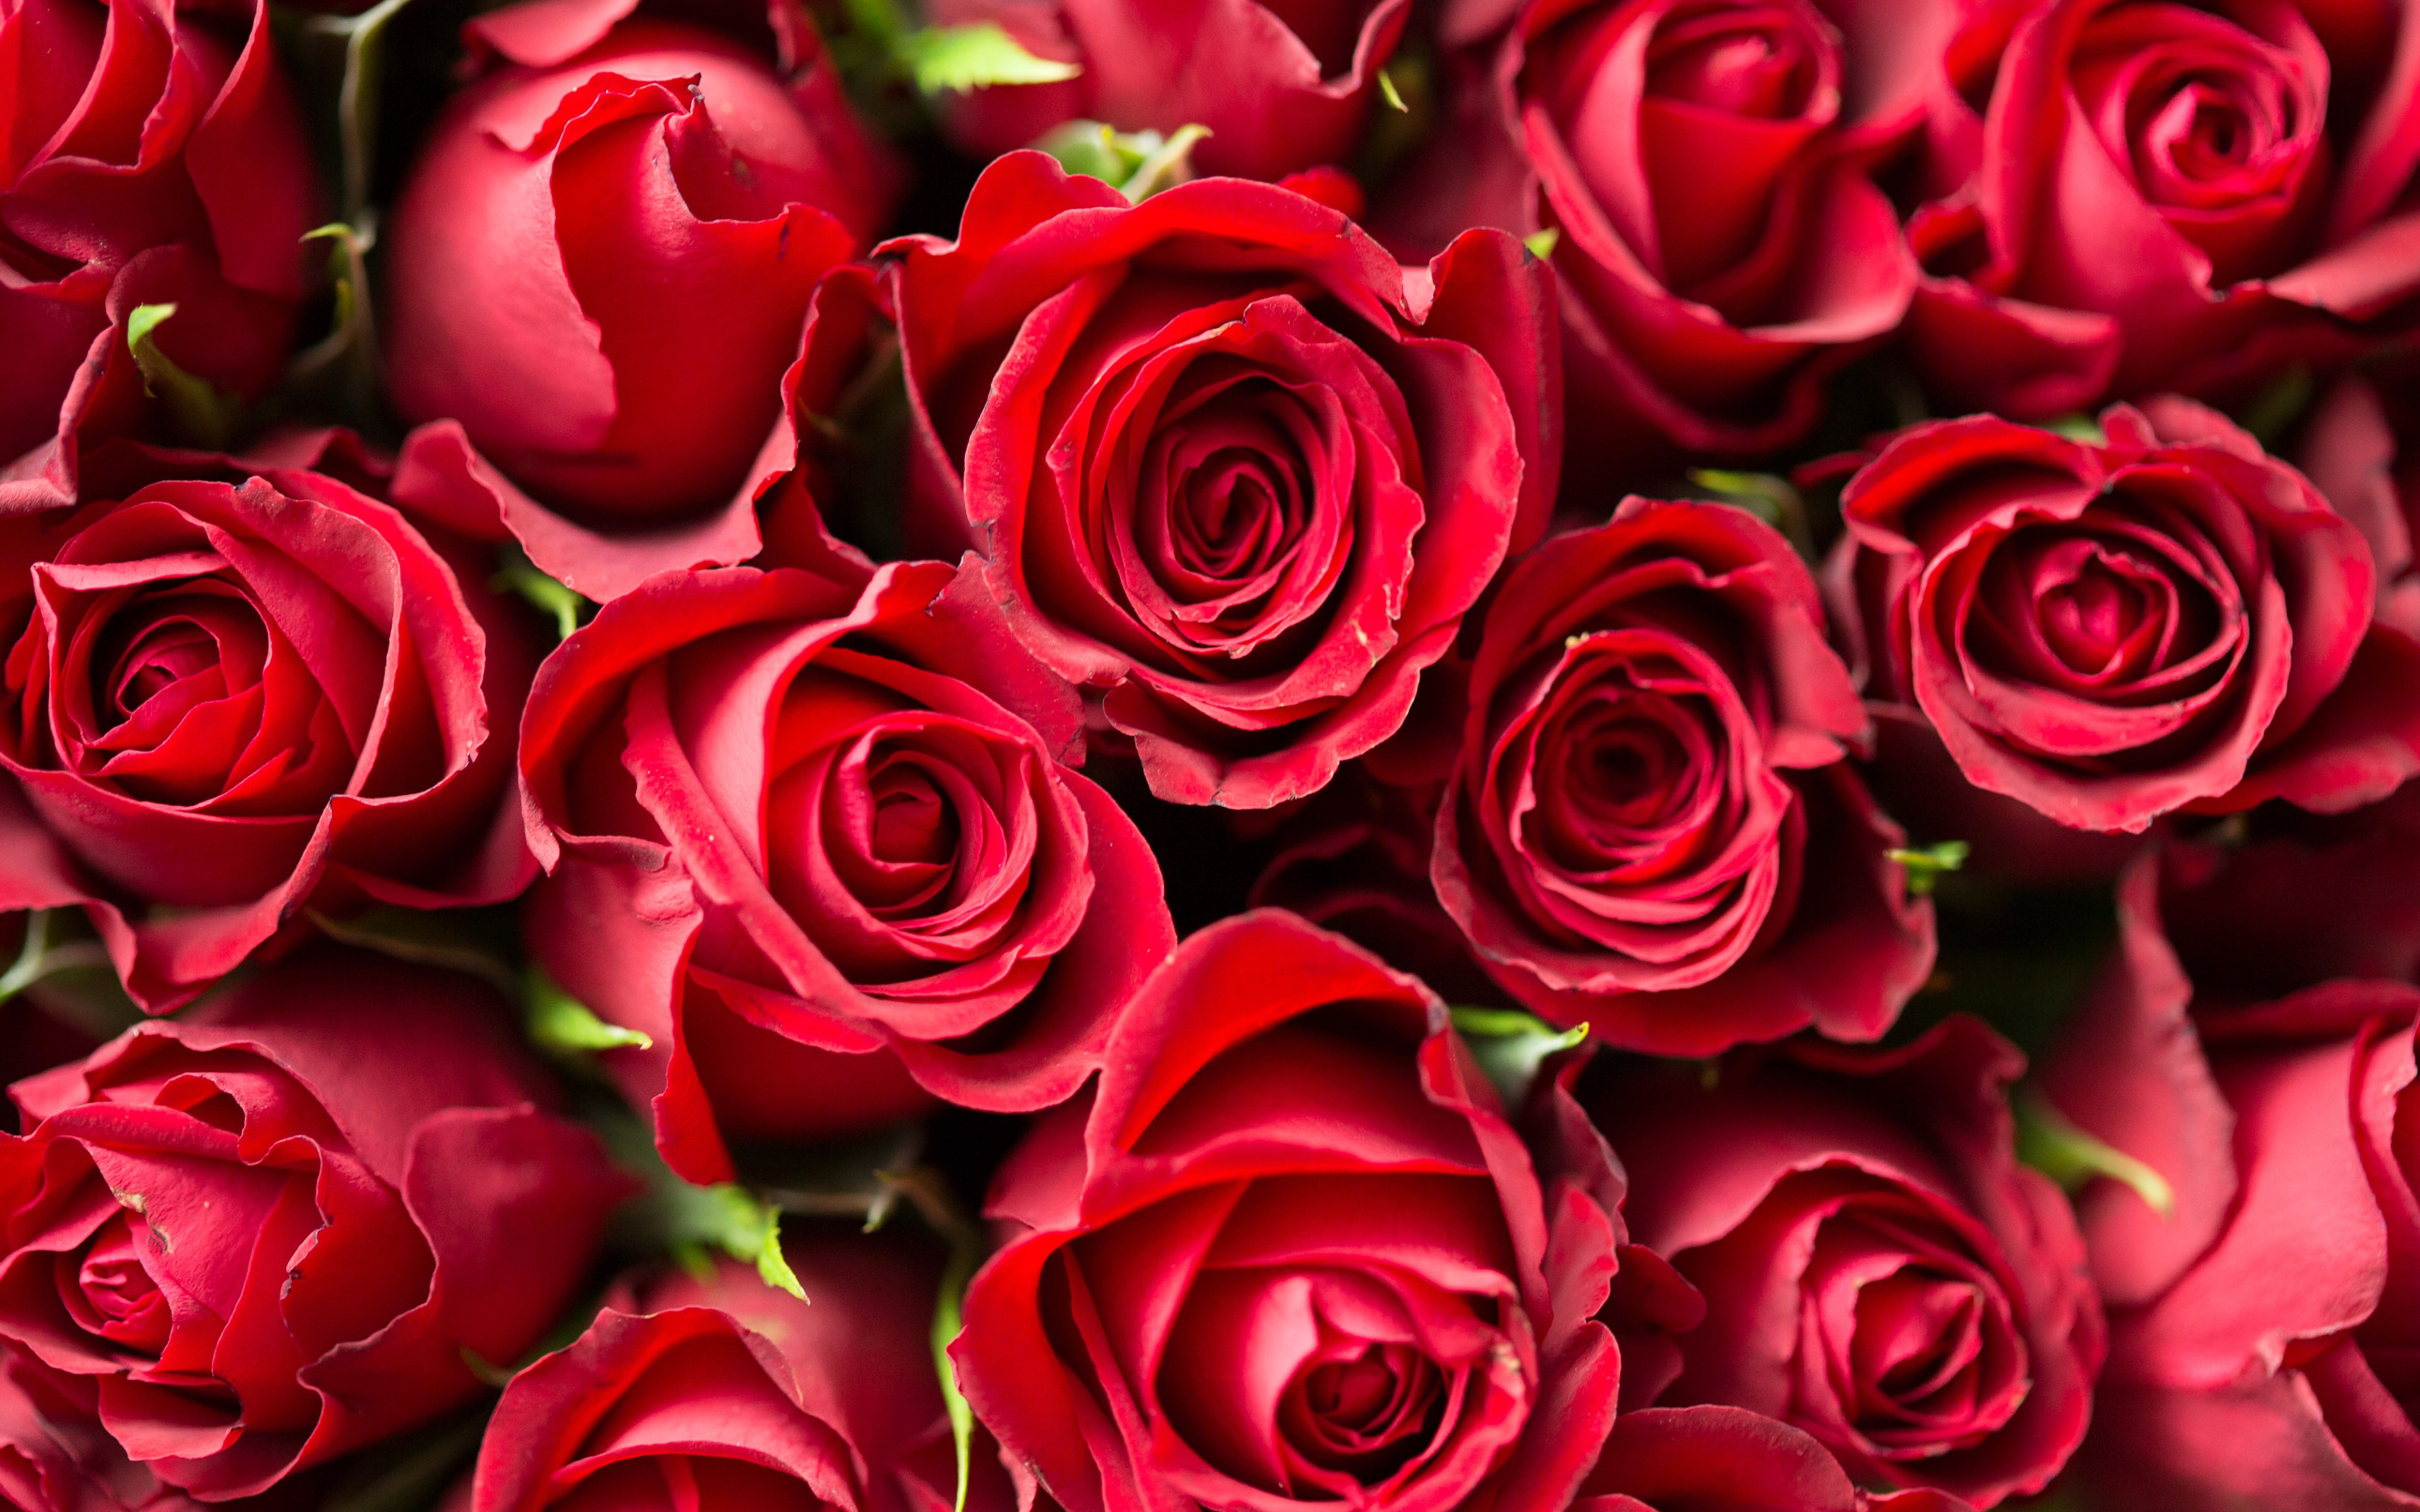 Lots of red roses wallpaper 3840x2400